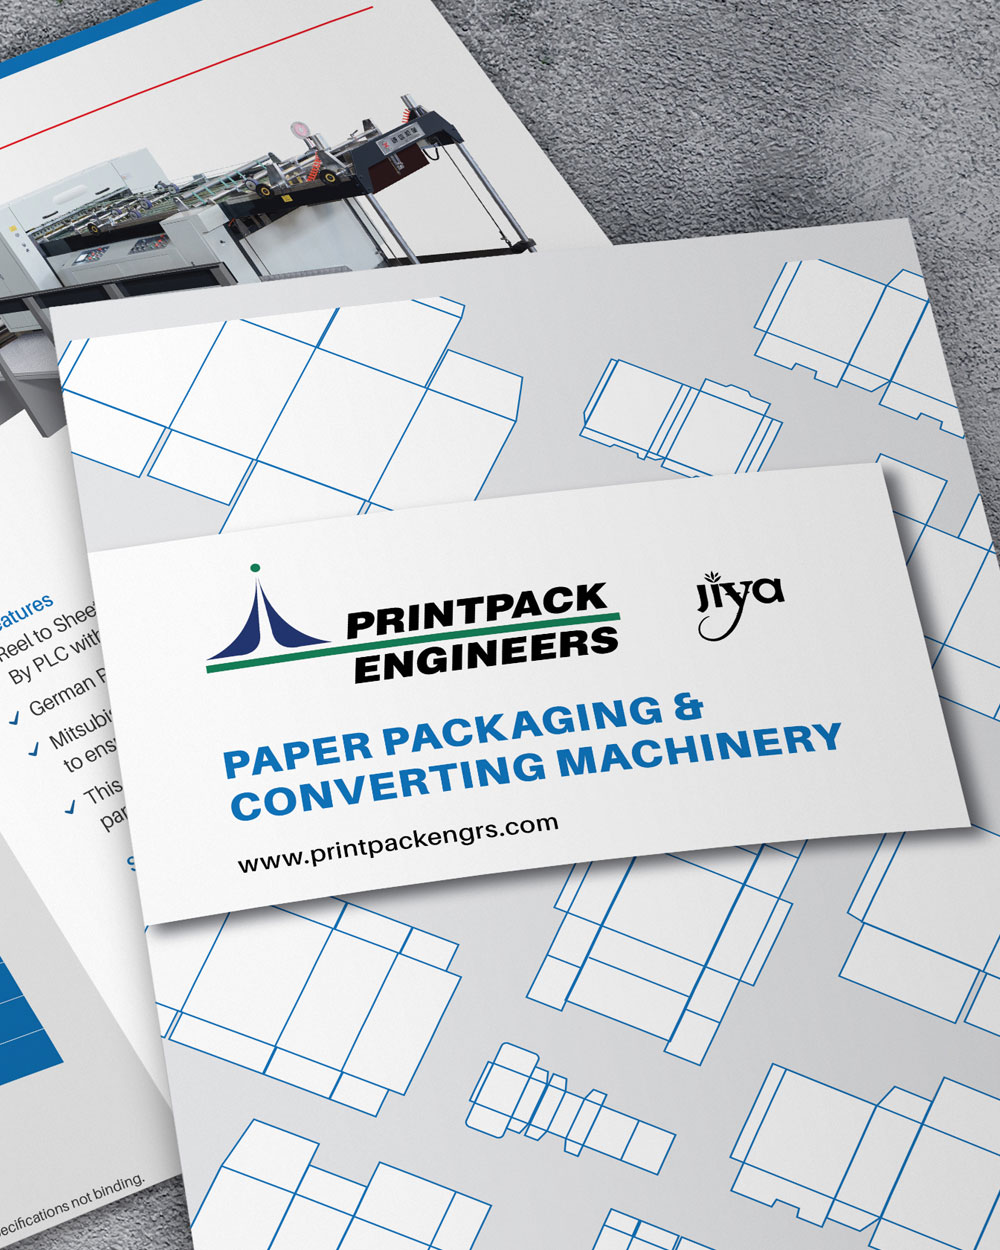 Machinery product catalog design & printing for Printpack Engineers